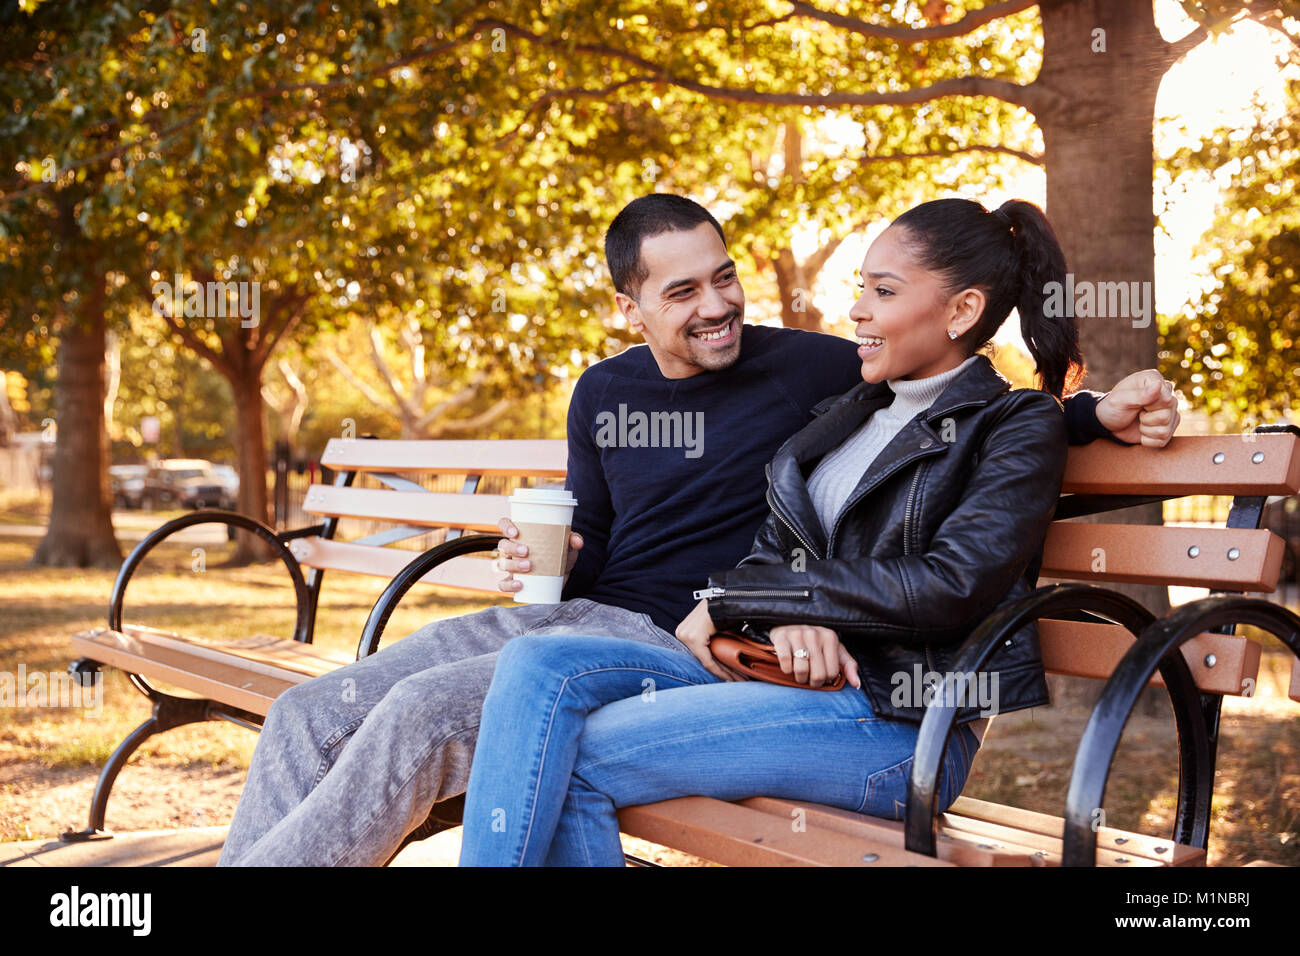 Young Hispanic couple sitting on bench in Brooklyn Park Banque D'Images